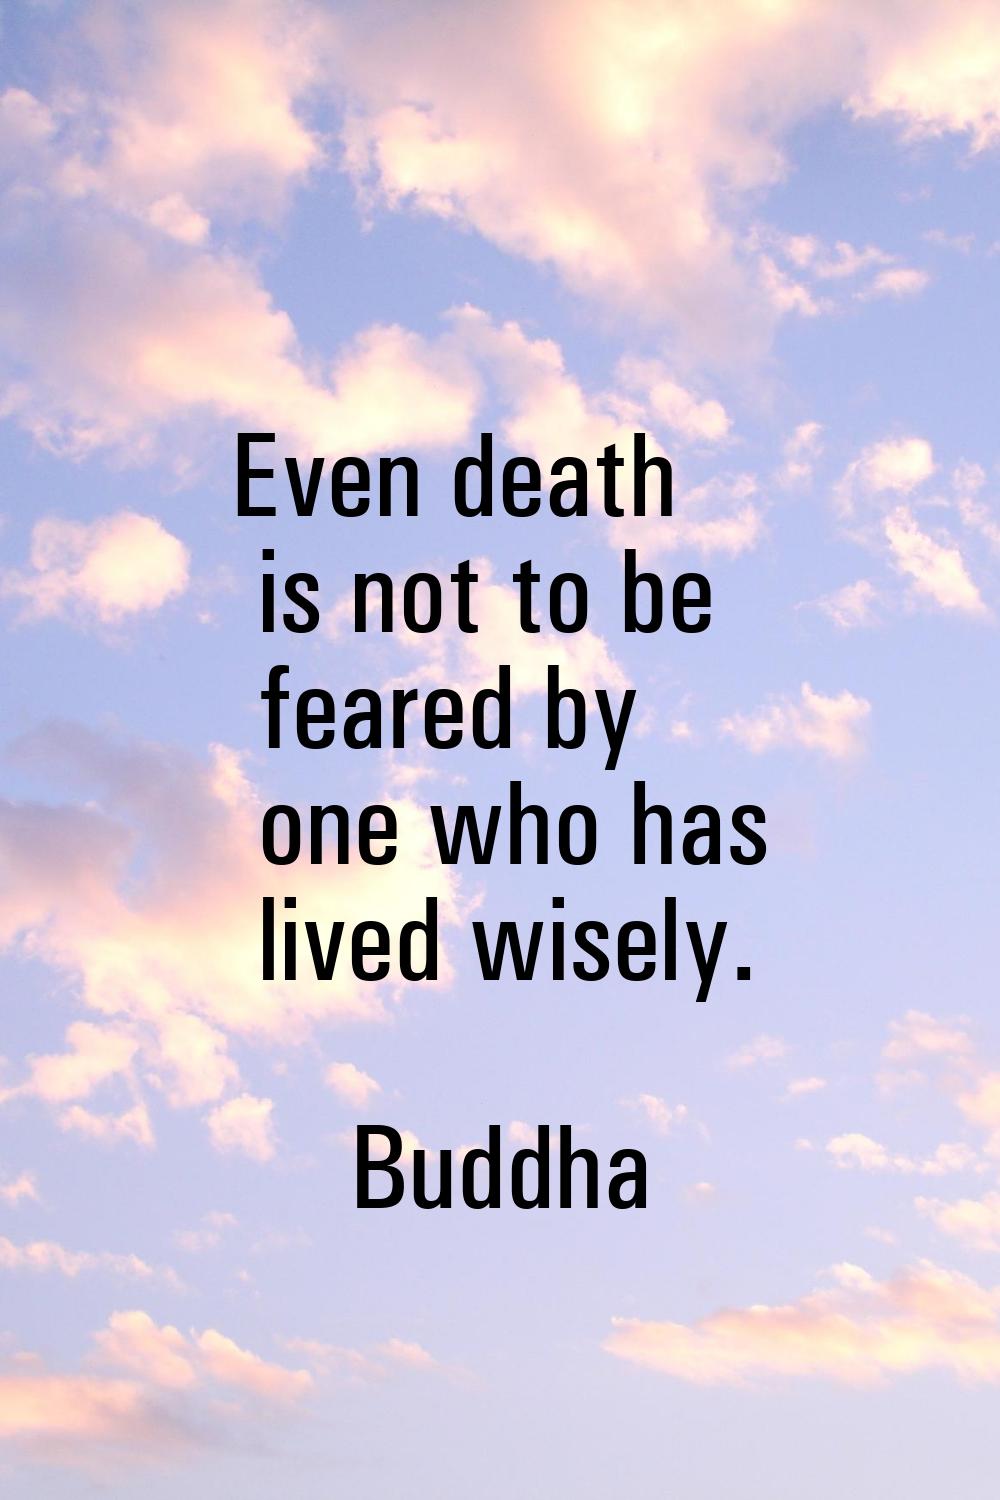 Even death is not to be feared by one who has lived wisely.